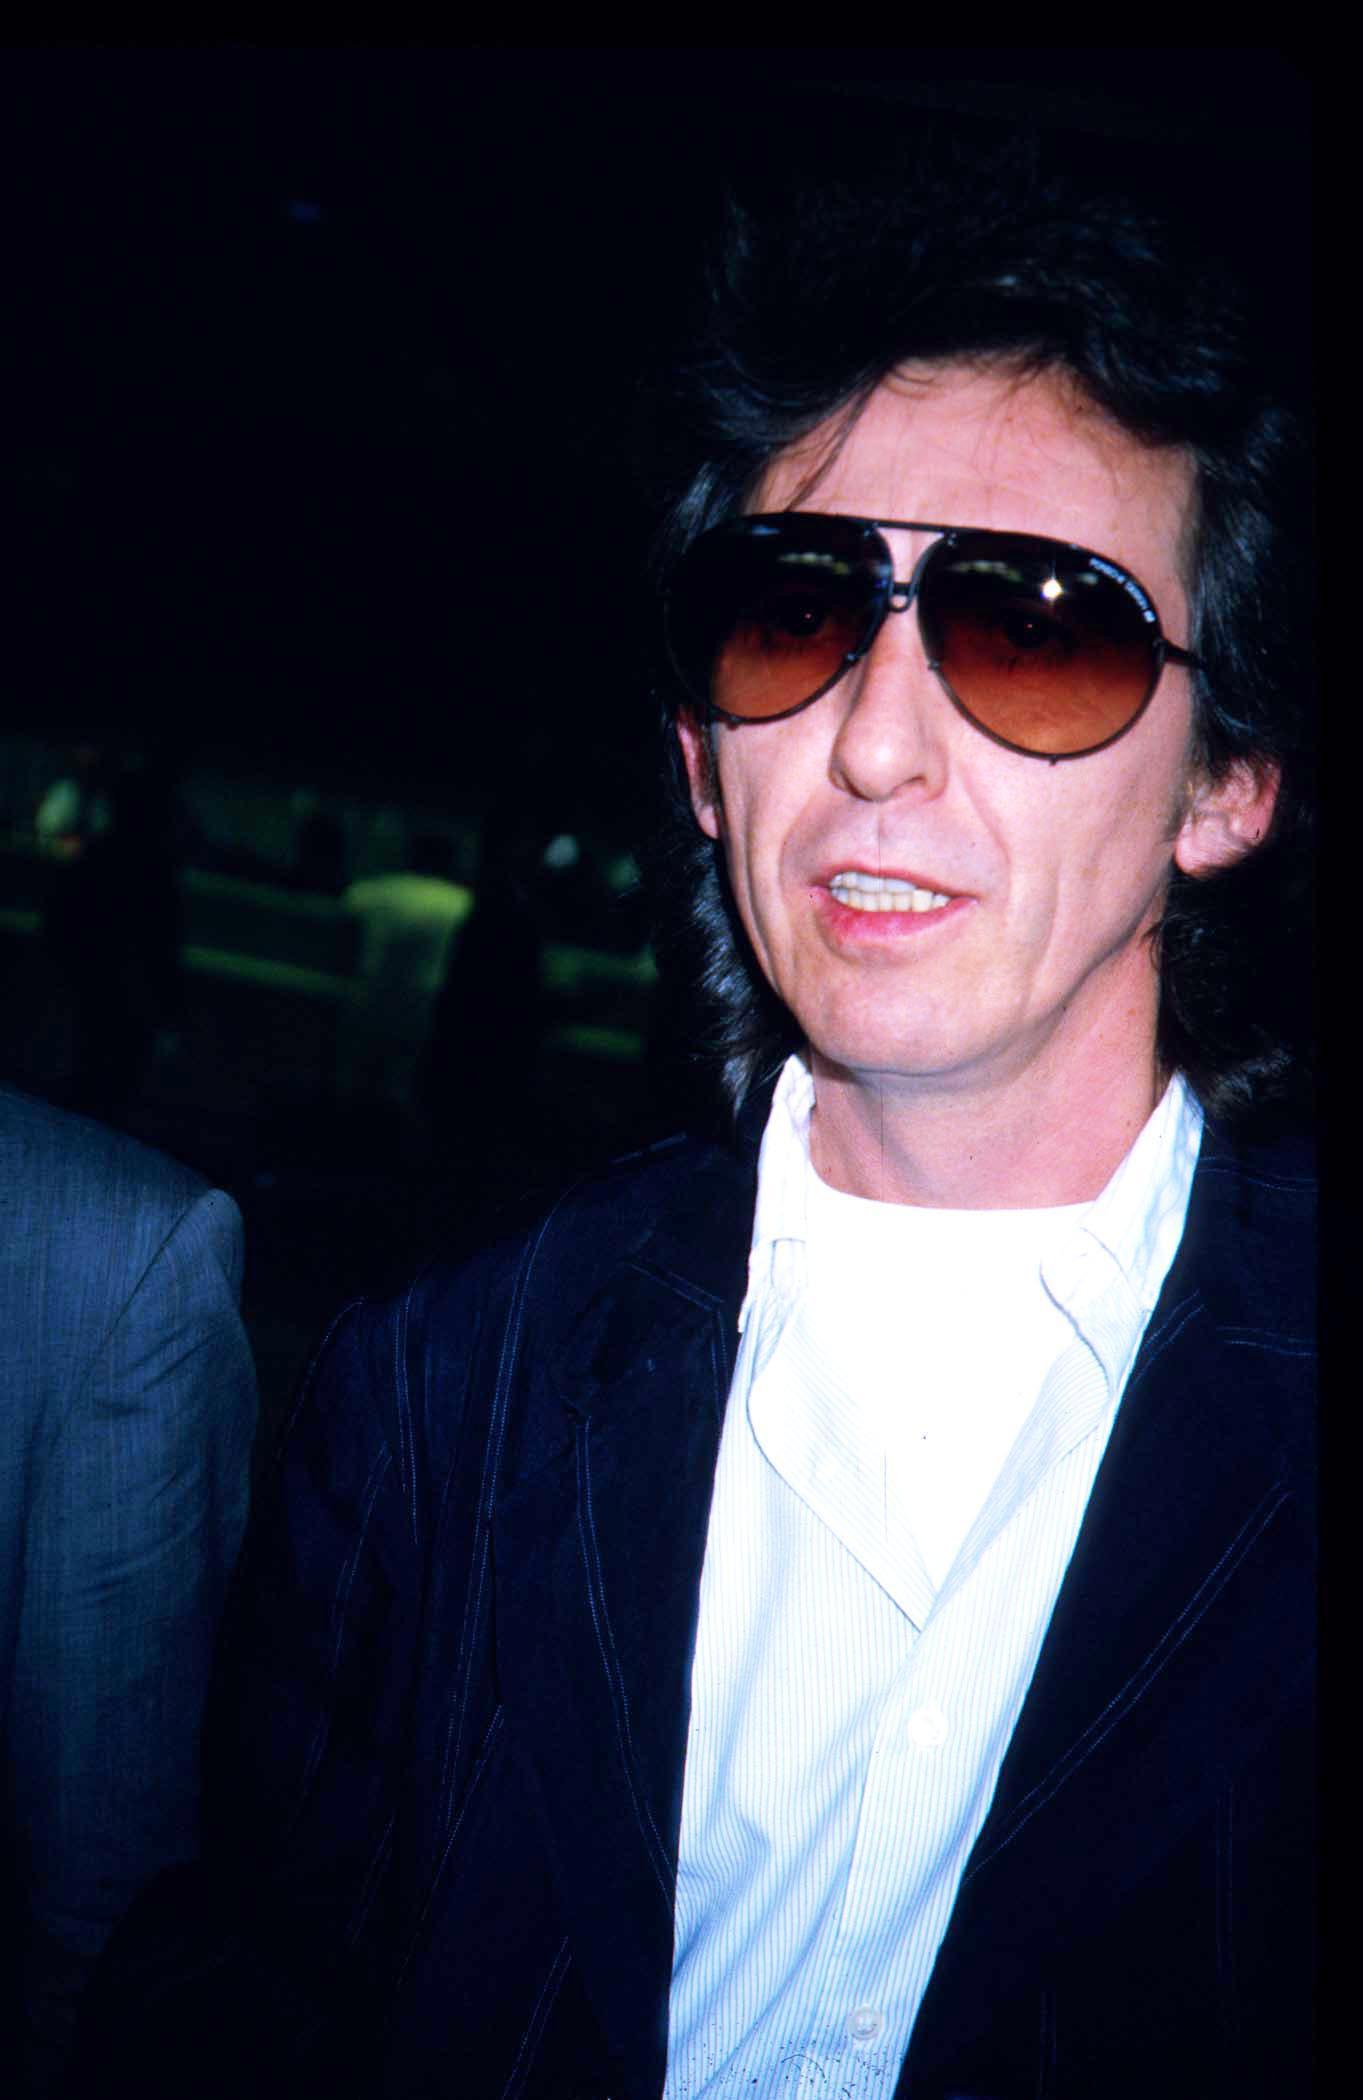 A photo showing George Harrison in a black suit, with a white inner T-shirt, and a pair of sunglasses.